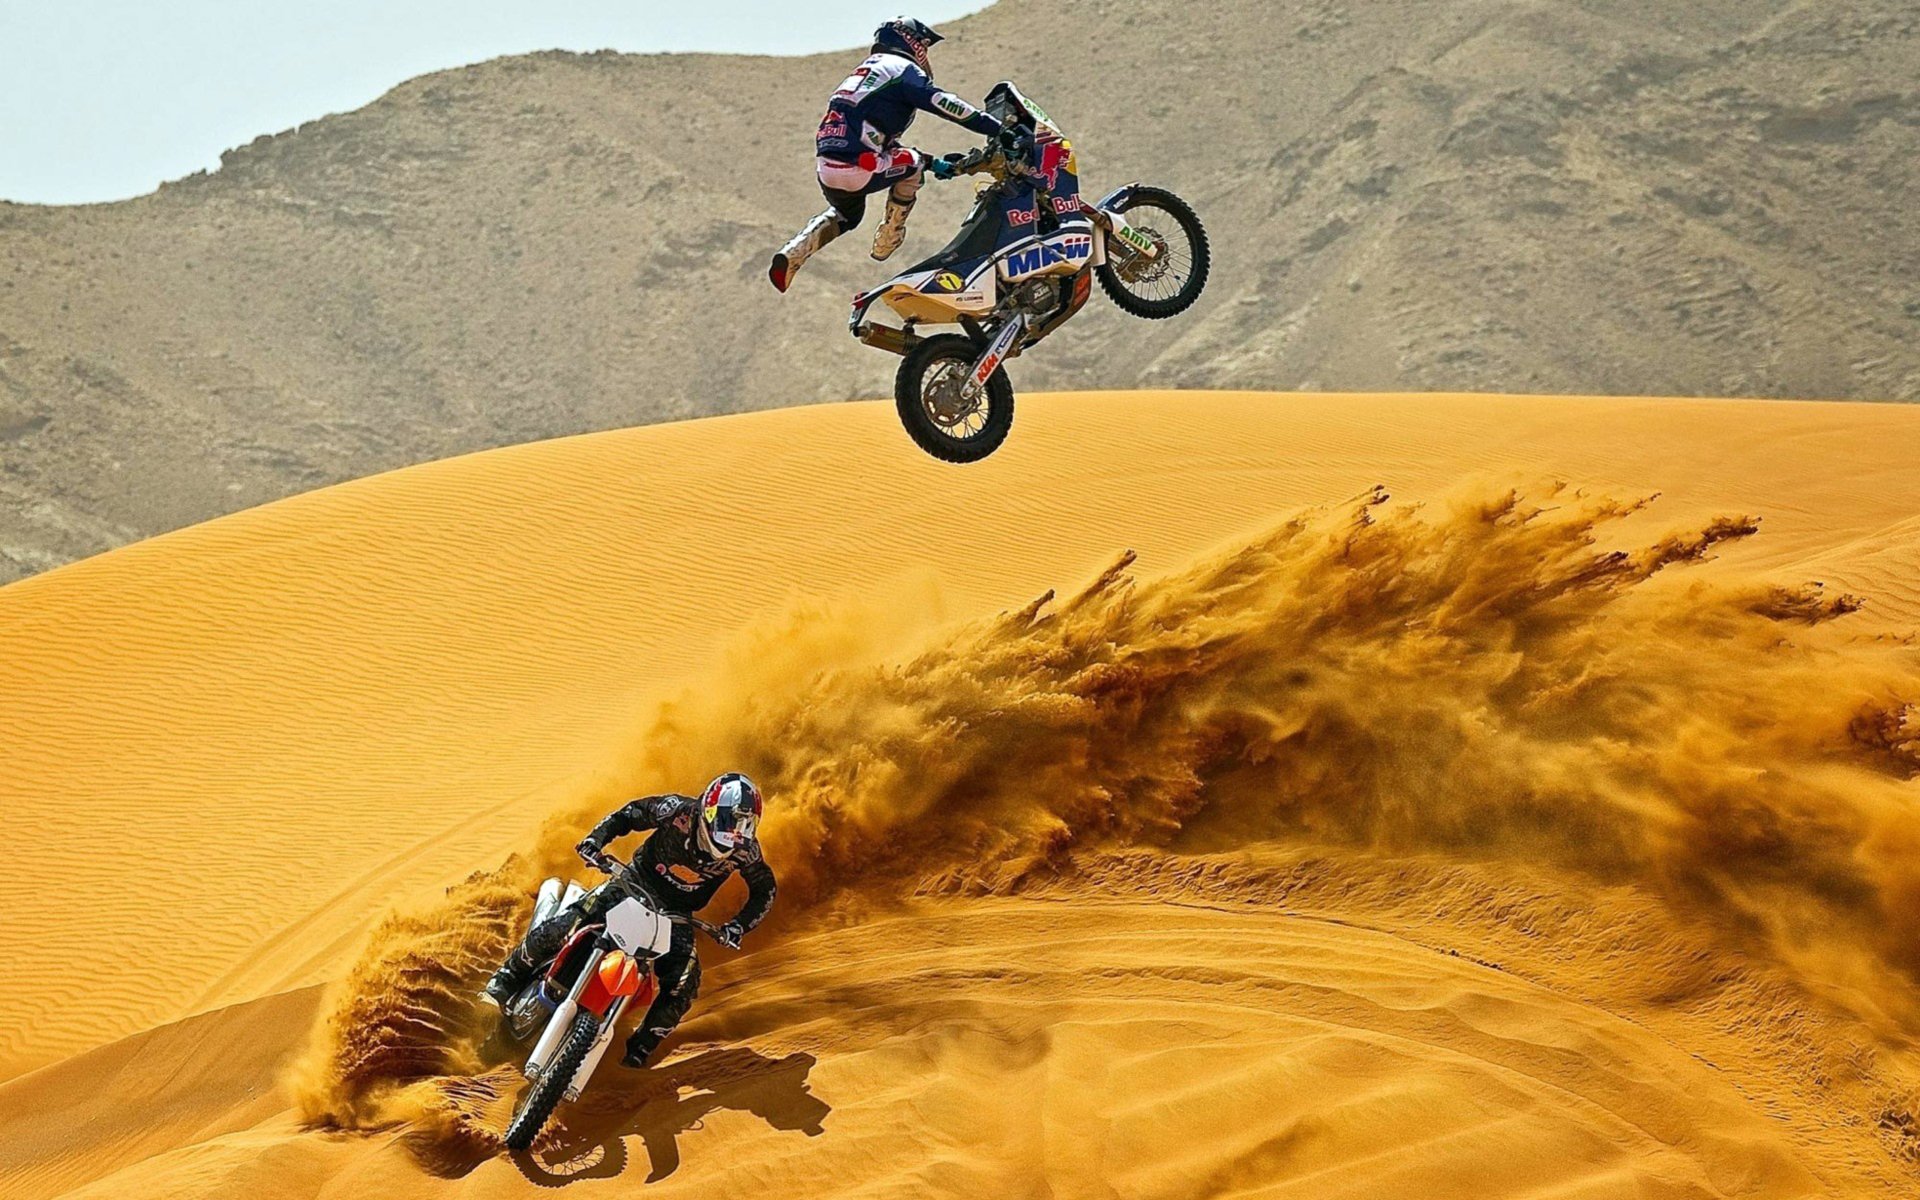 motorcycle-jumping-contest-on-sand-dunes Image - ID: 291949 - Image Abyss